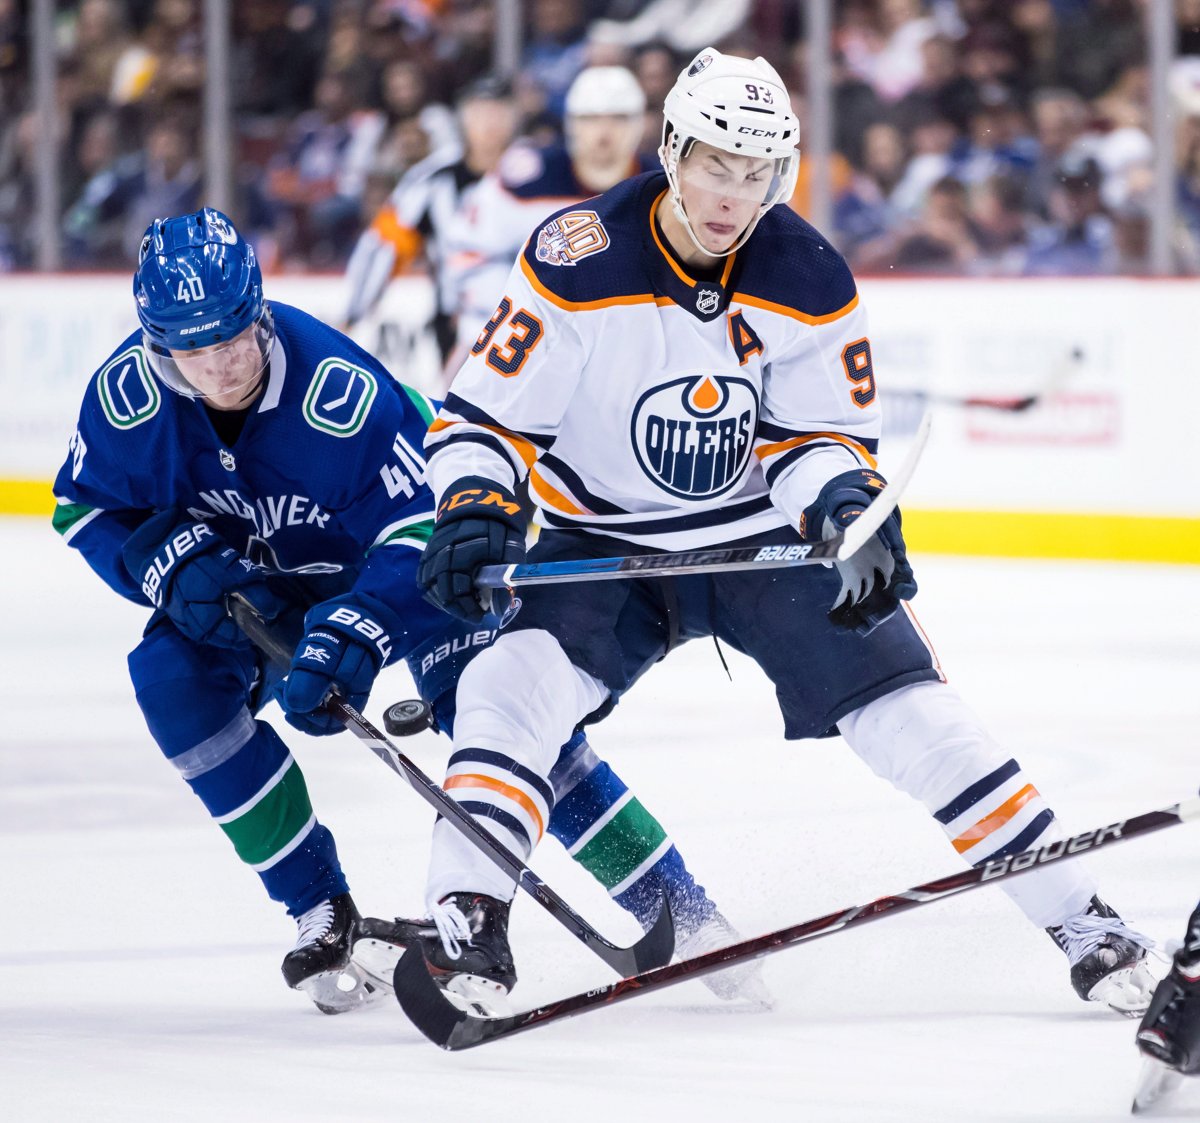 Vancouver Canucks' Elias Pettersson (40), of Sweden, takes the puck away from Edmonton Oilers' Ryan Nugent-Hopkins (93) during third period NHL hockey action in Vancouver on Sunday, Dec. 16, 2018. THE CANADIAN PRESS/Darryl Dyck.